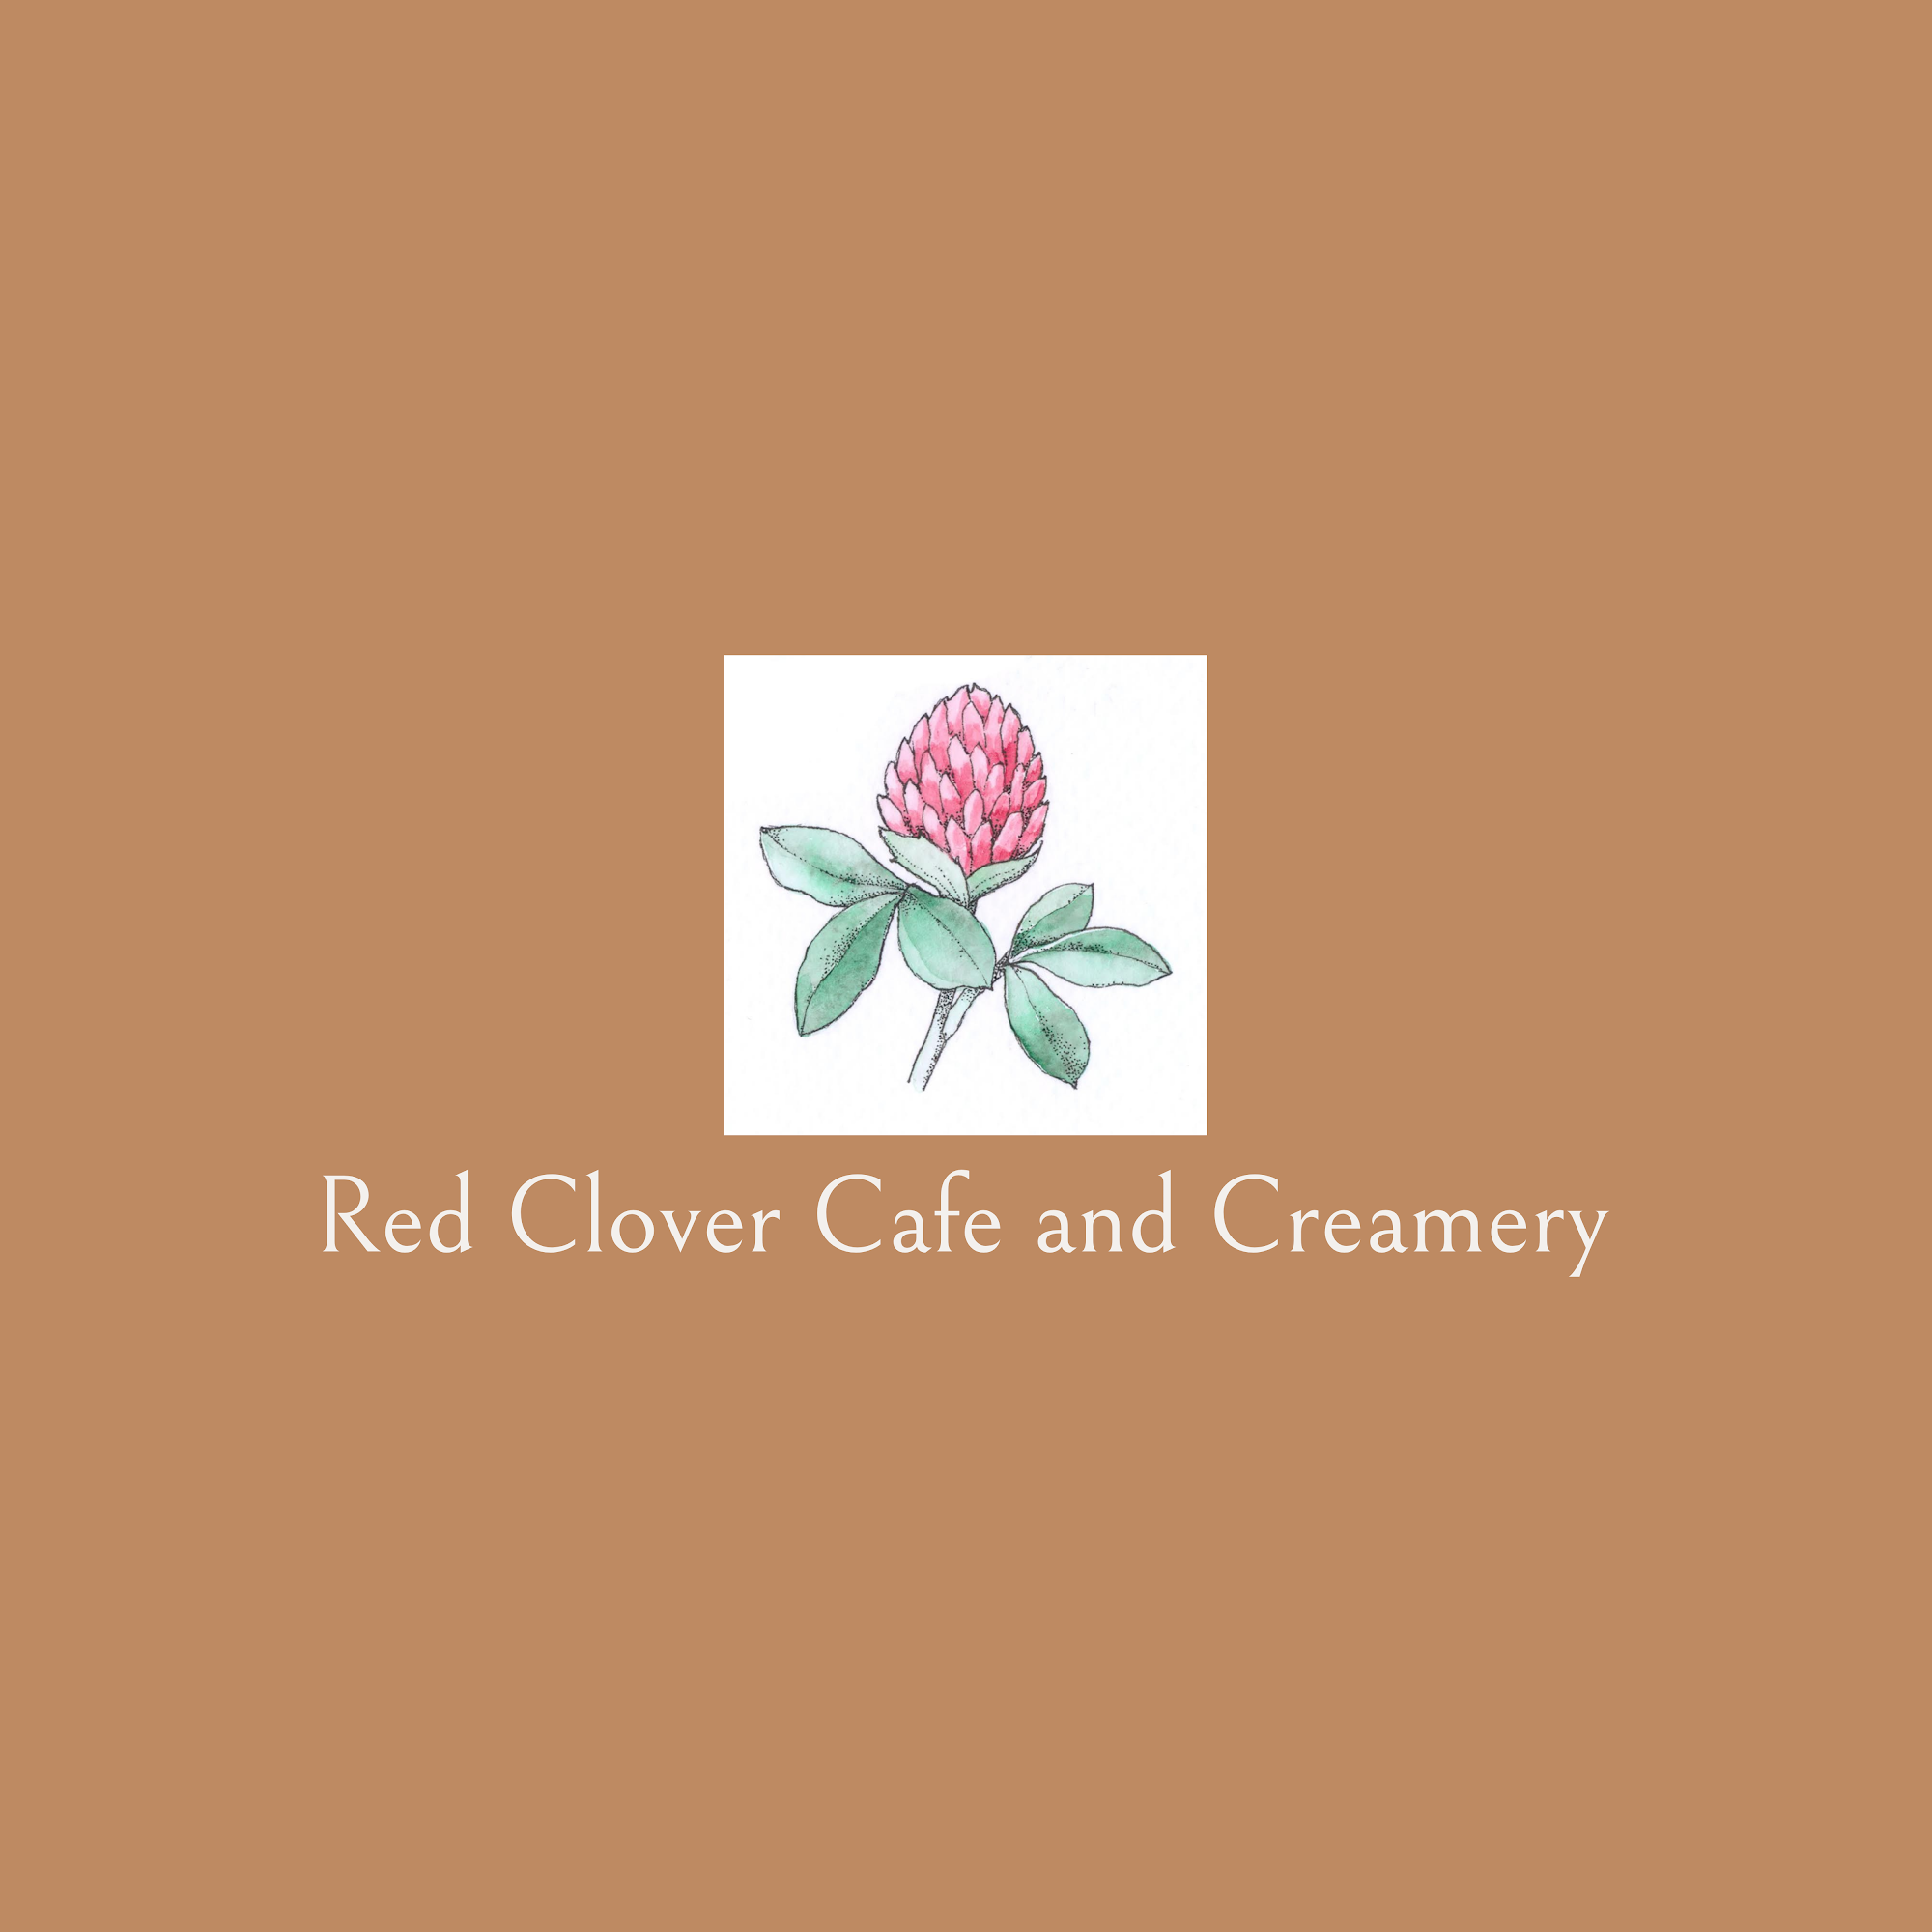 Red Clover Cafe and Creamery